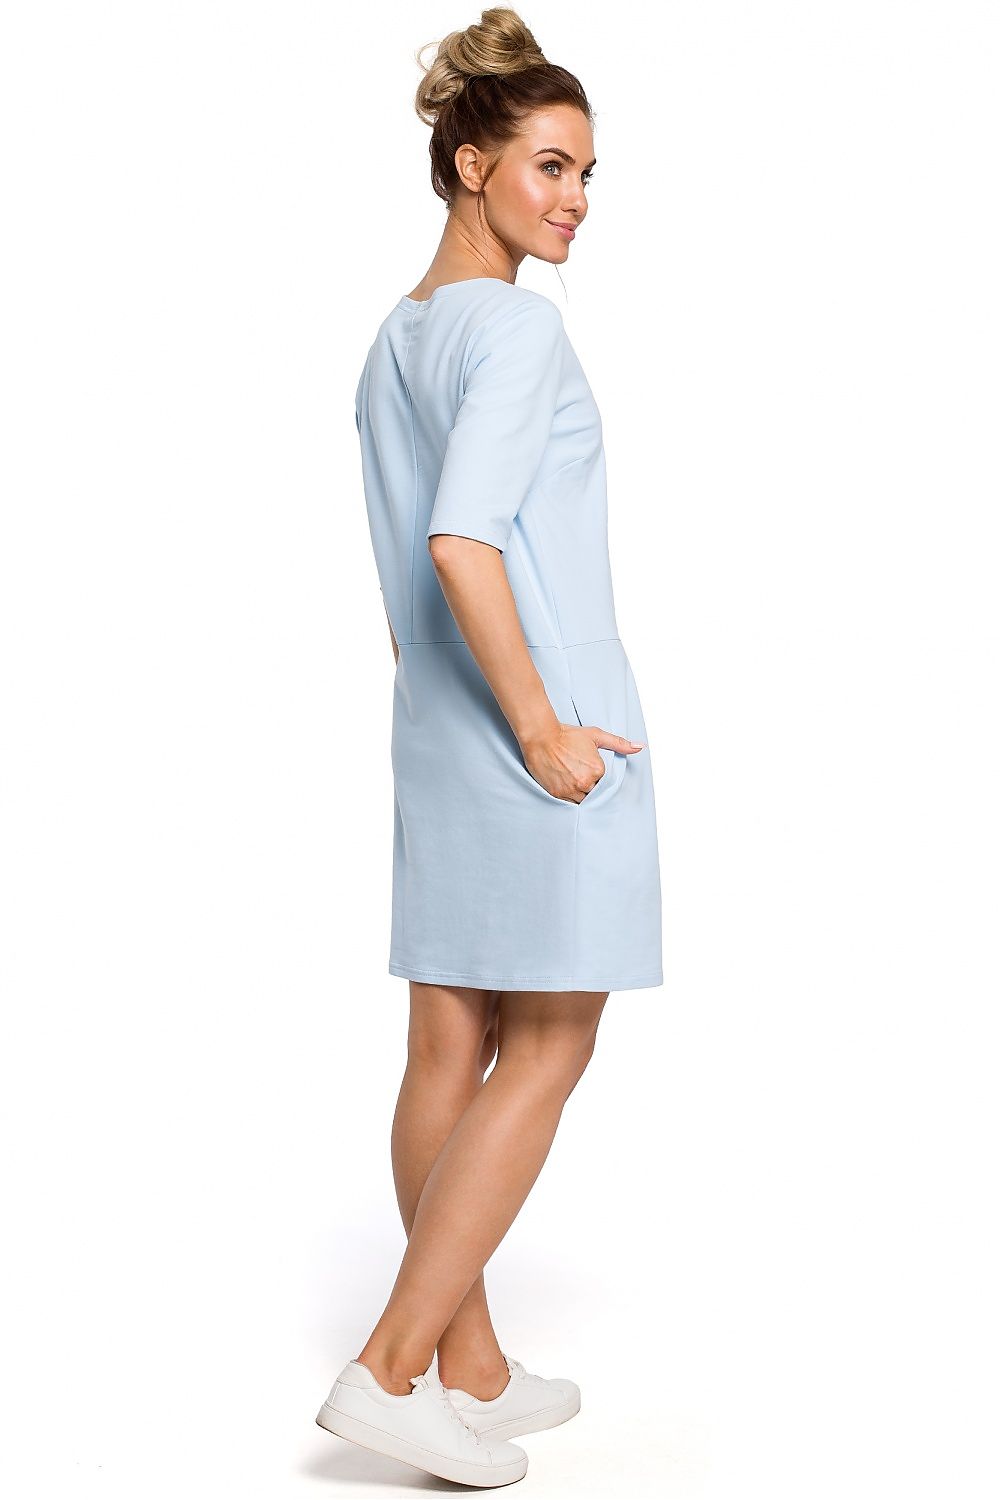 Blue Short Sleeves Drop Waist Dress with Bow Shoulder